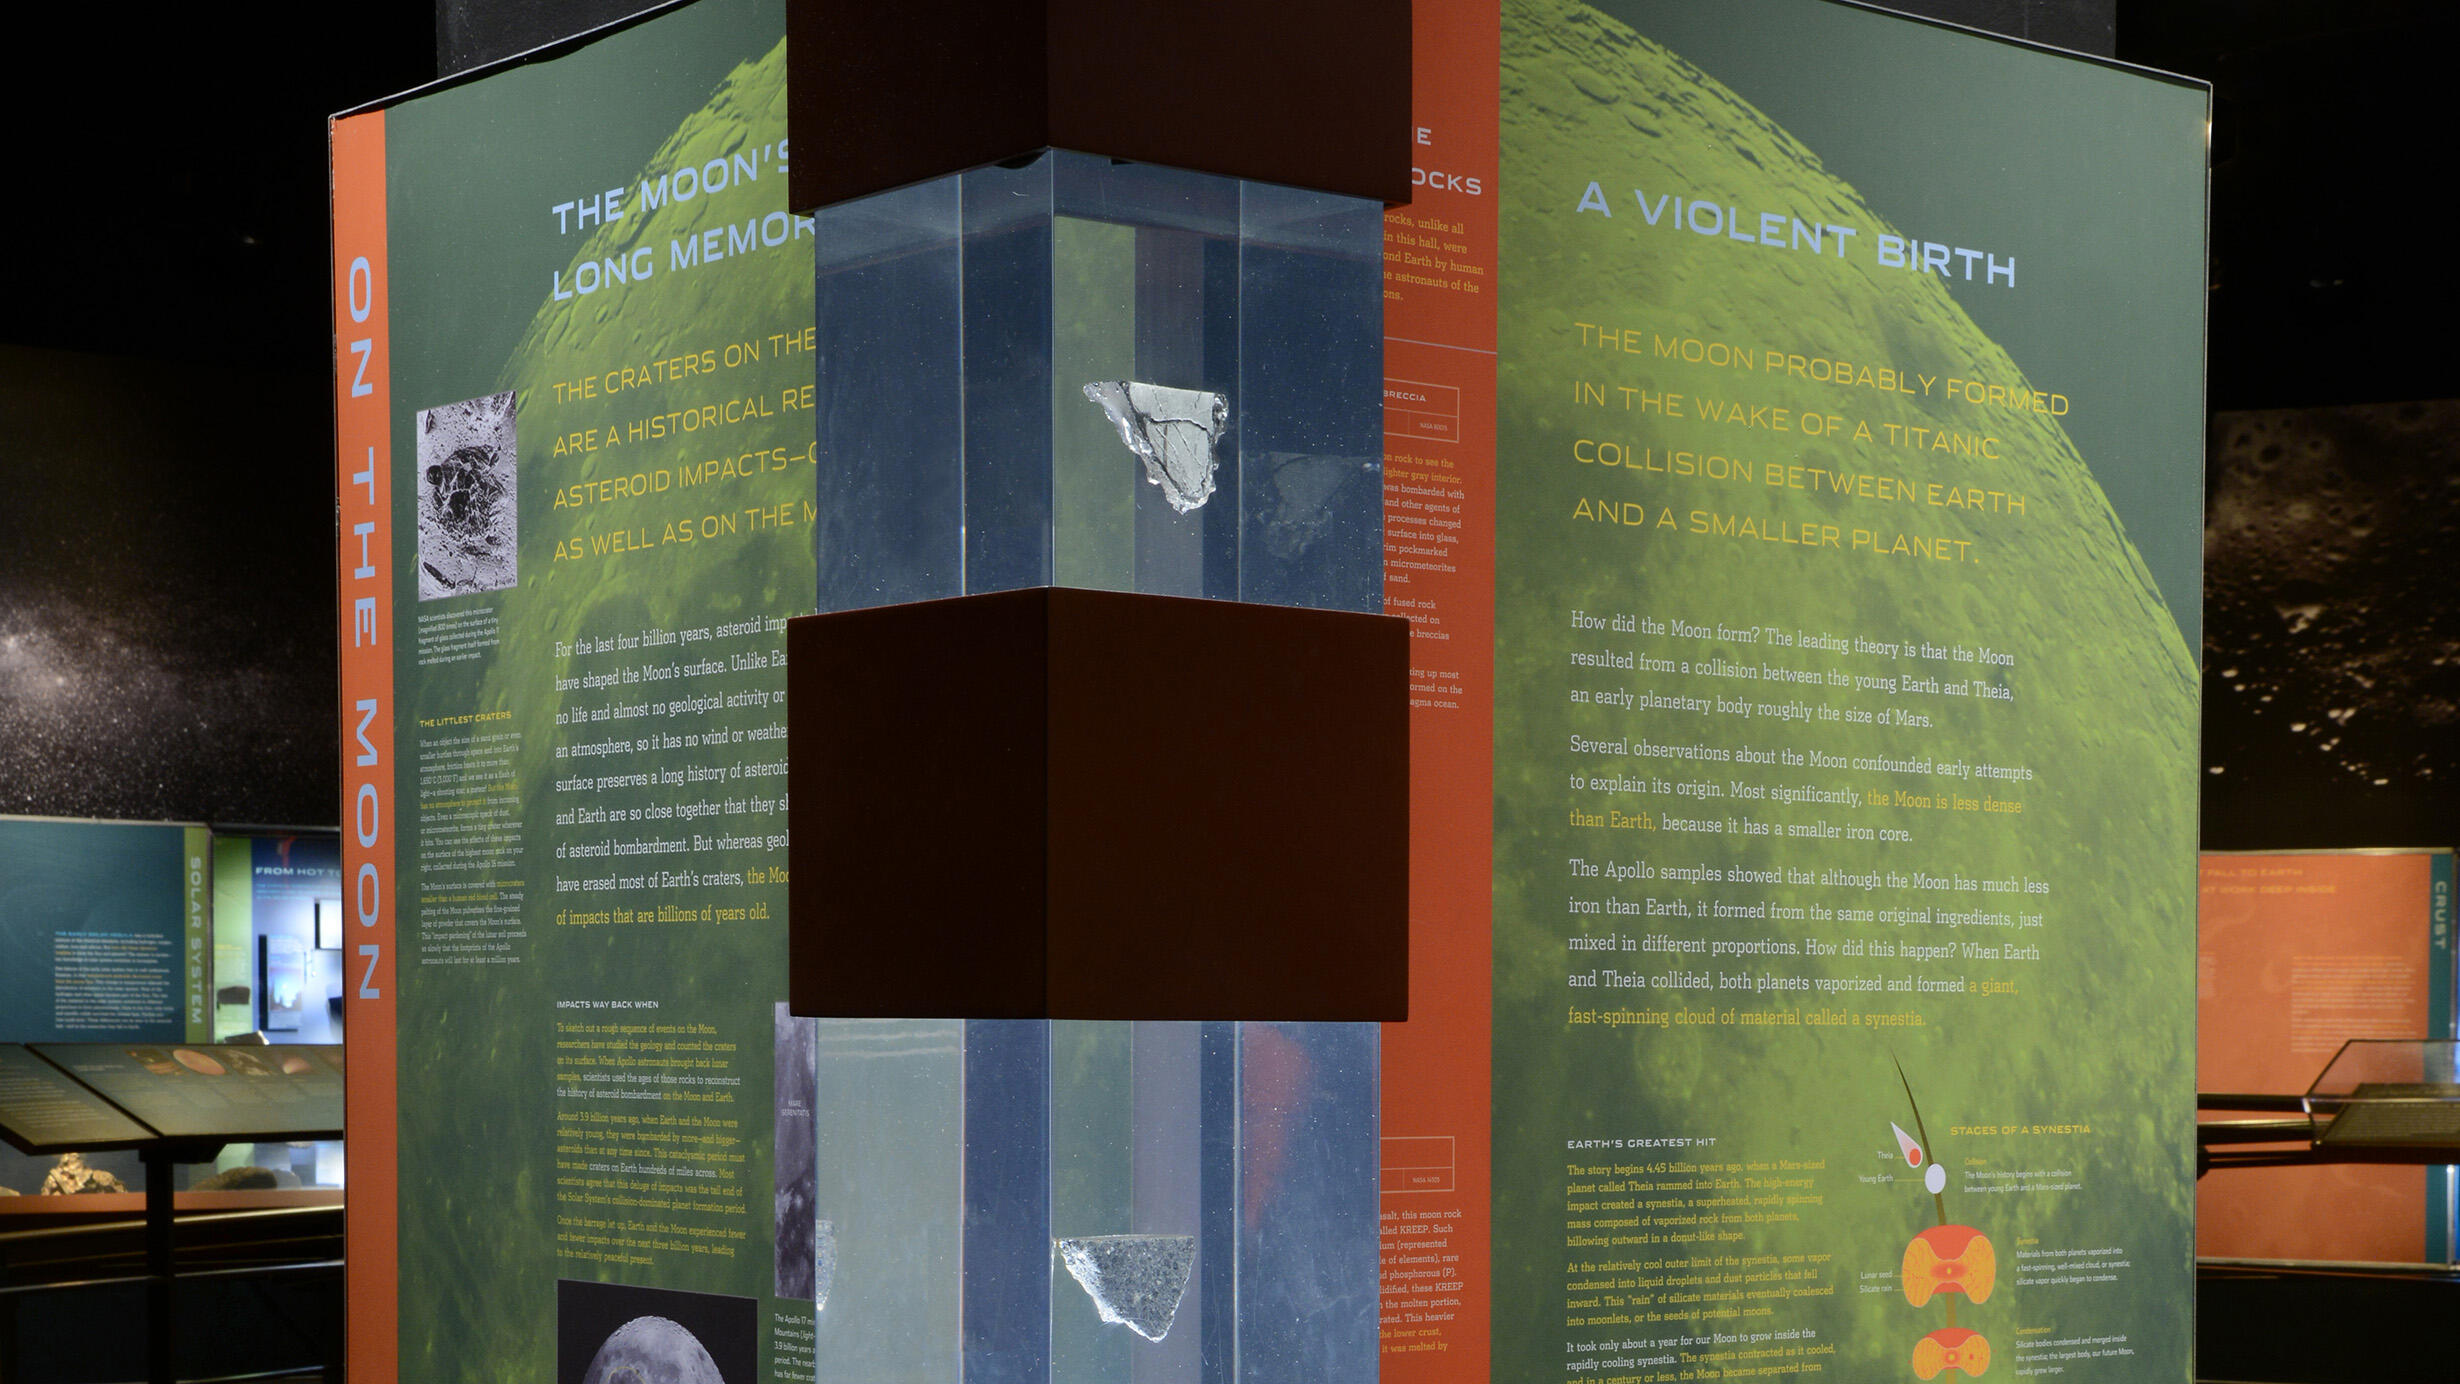 Moon subsection in the Hall of Meteorites displaying four lunar meteorites, images, graphics and text.